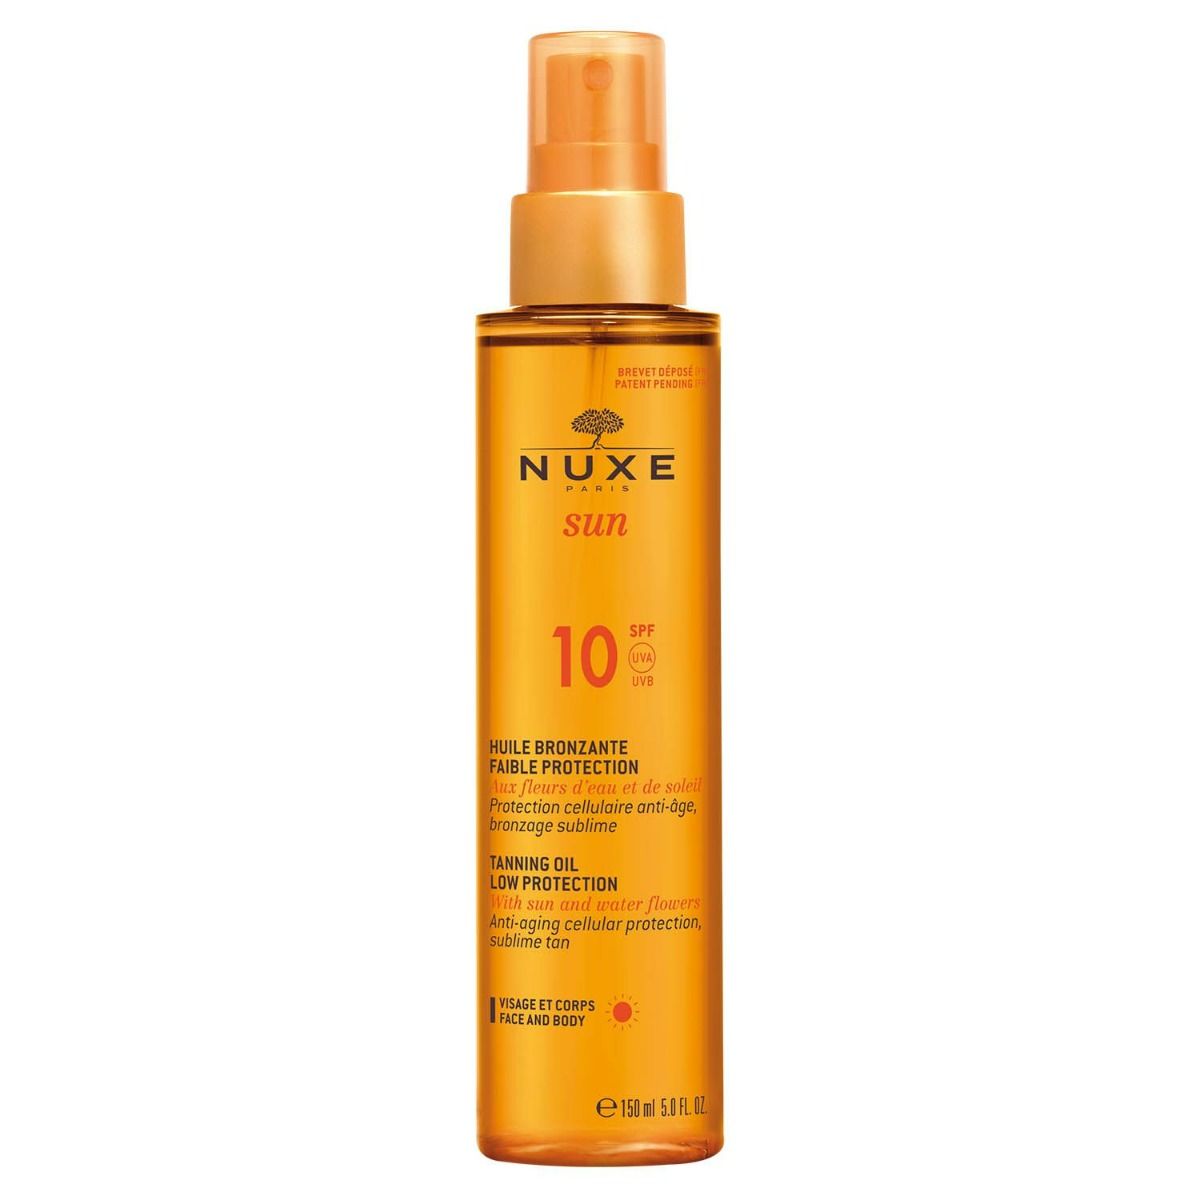 Nuxe Sun SPF10 масло для загара, 150 ml nuxe sun tanning oil spf10 face and body 150 ml